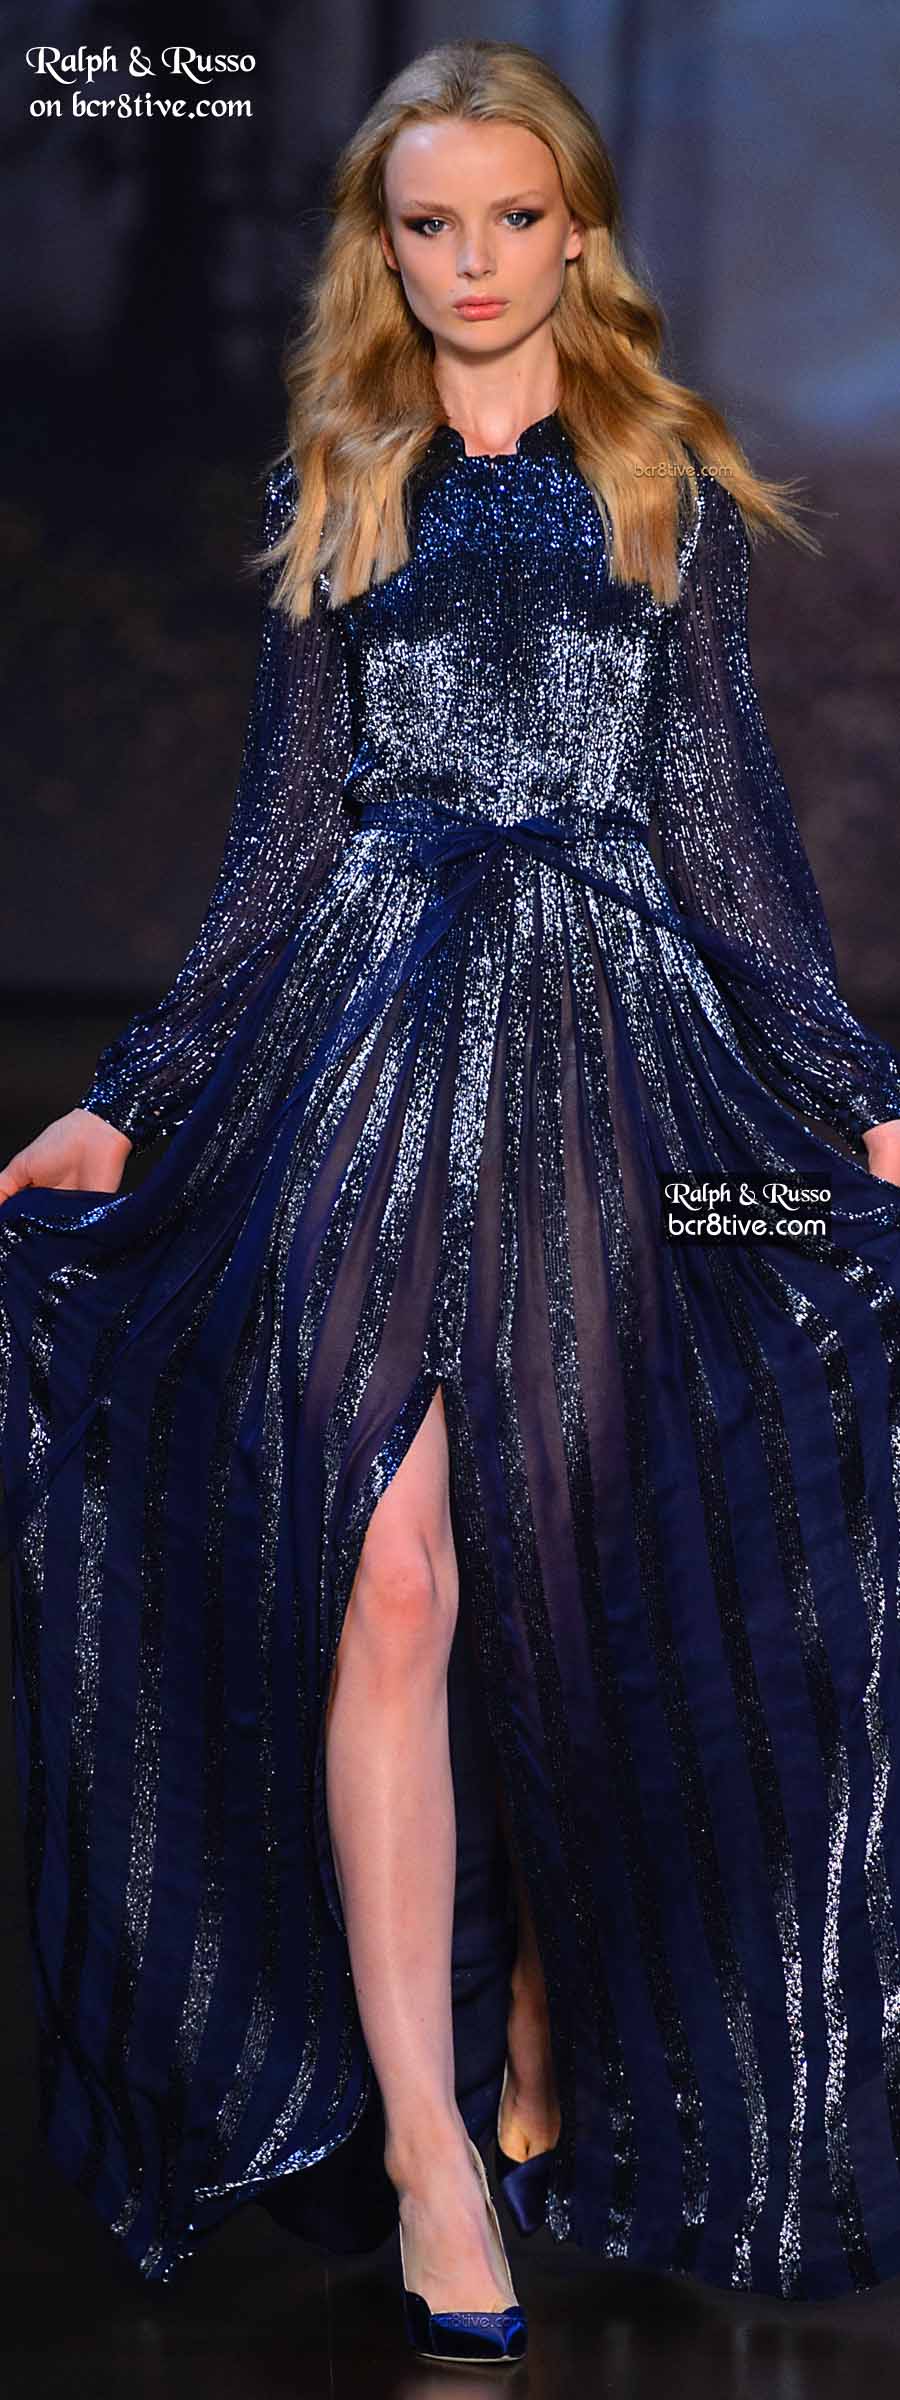 Ralph & Russo Haute Couture Fall 2015-16